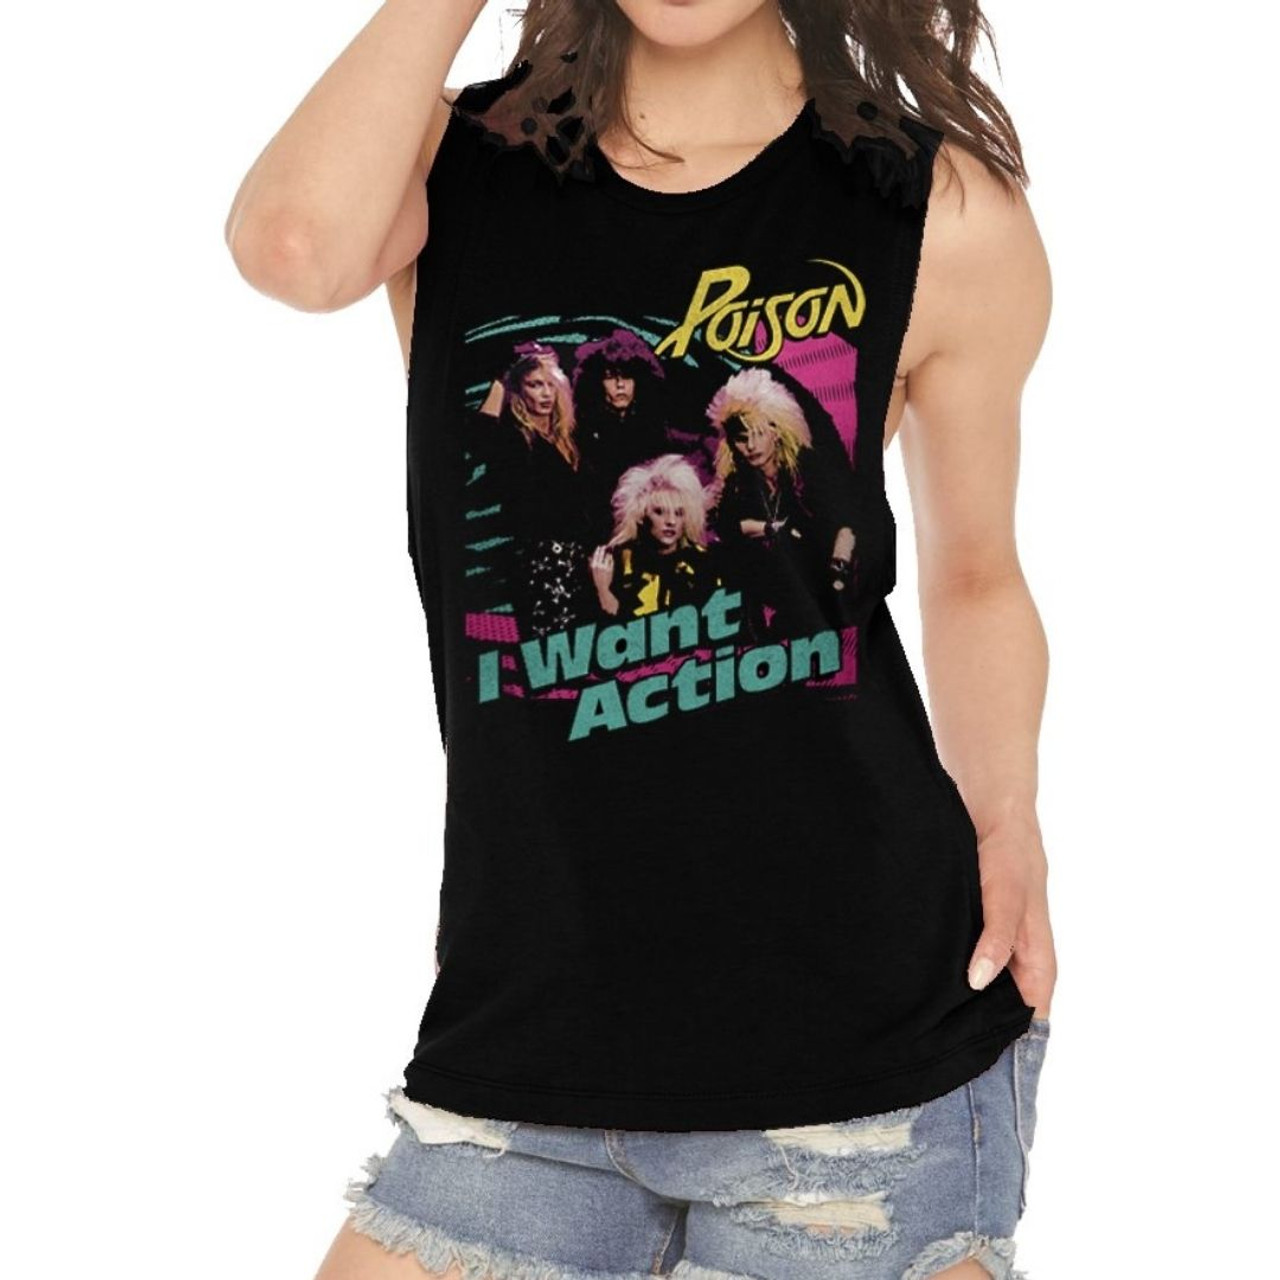 Poison Women's Vintage Fashion Sleeveless T-Shirt - I Want Action Song Single Album Cover Art. Black Muscle Tank Top Shirt